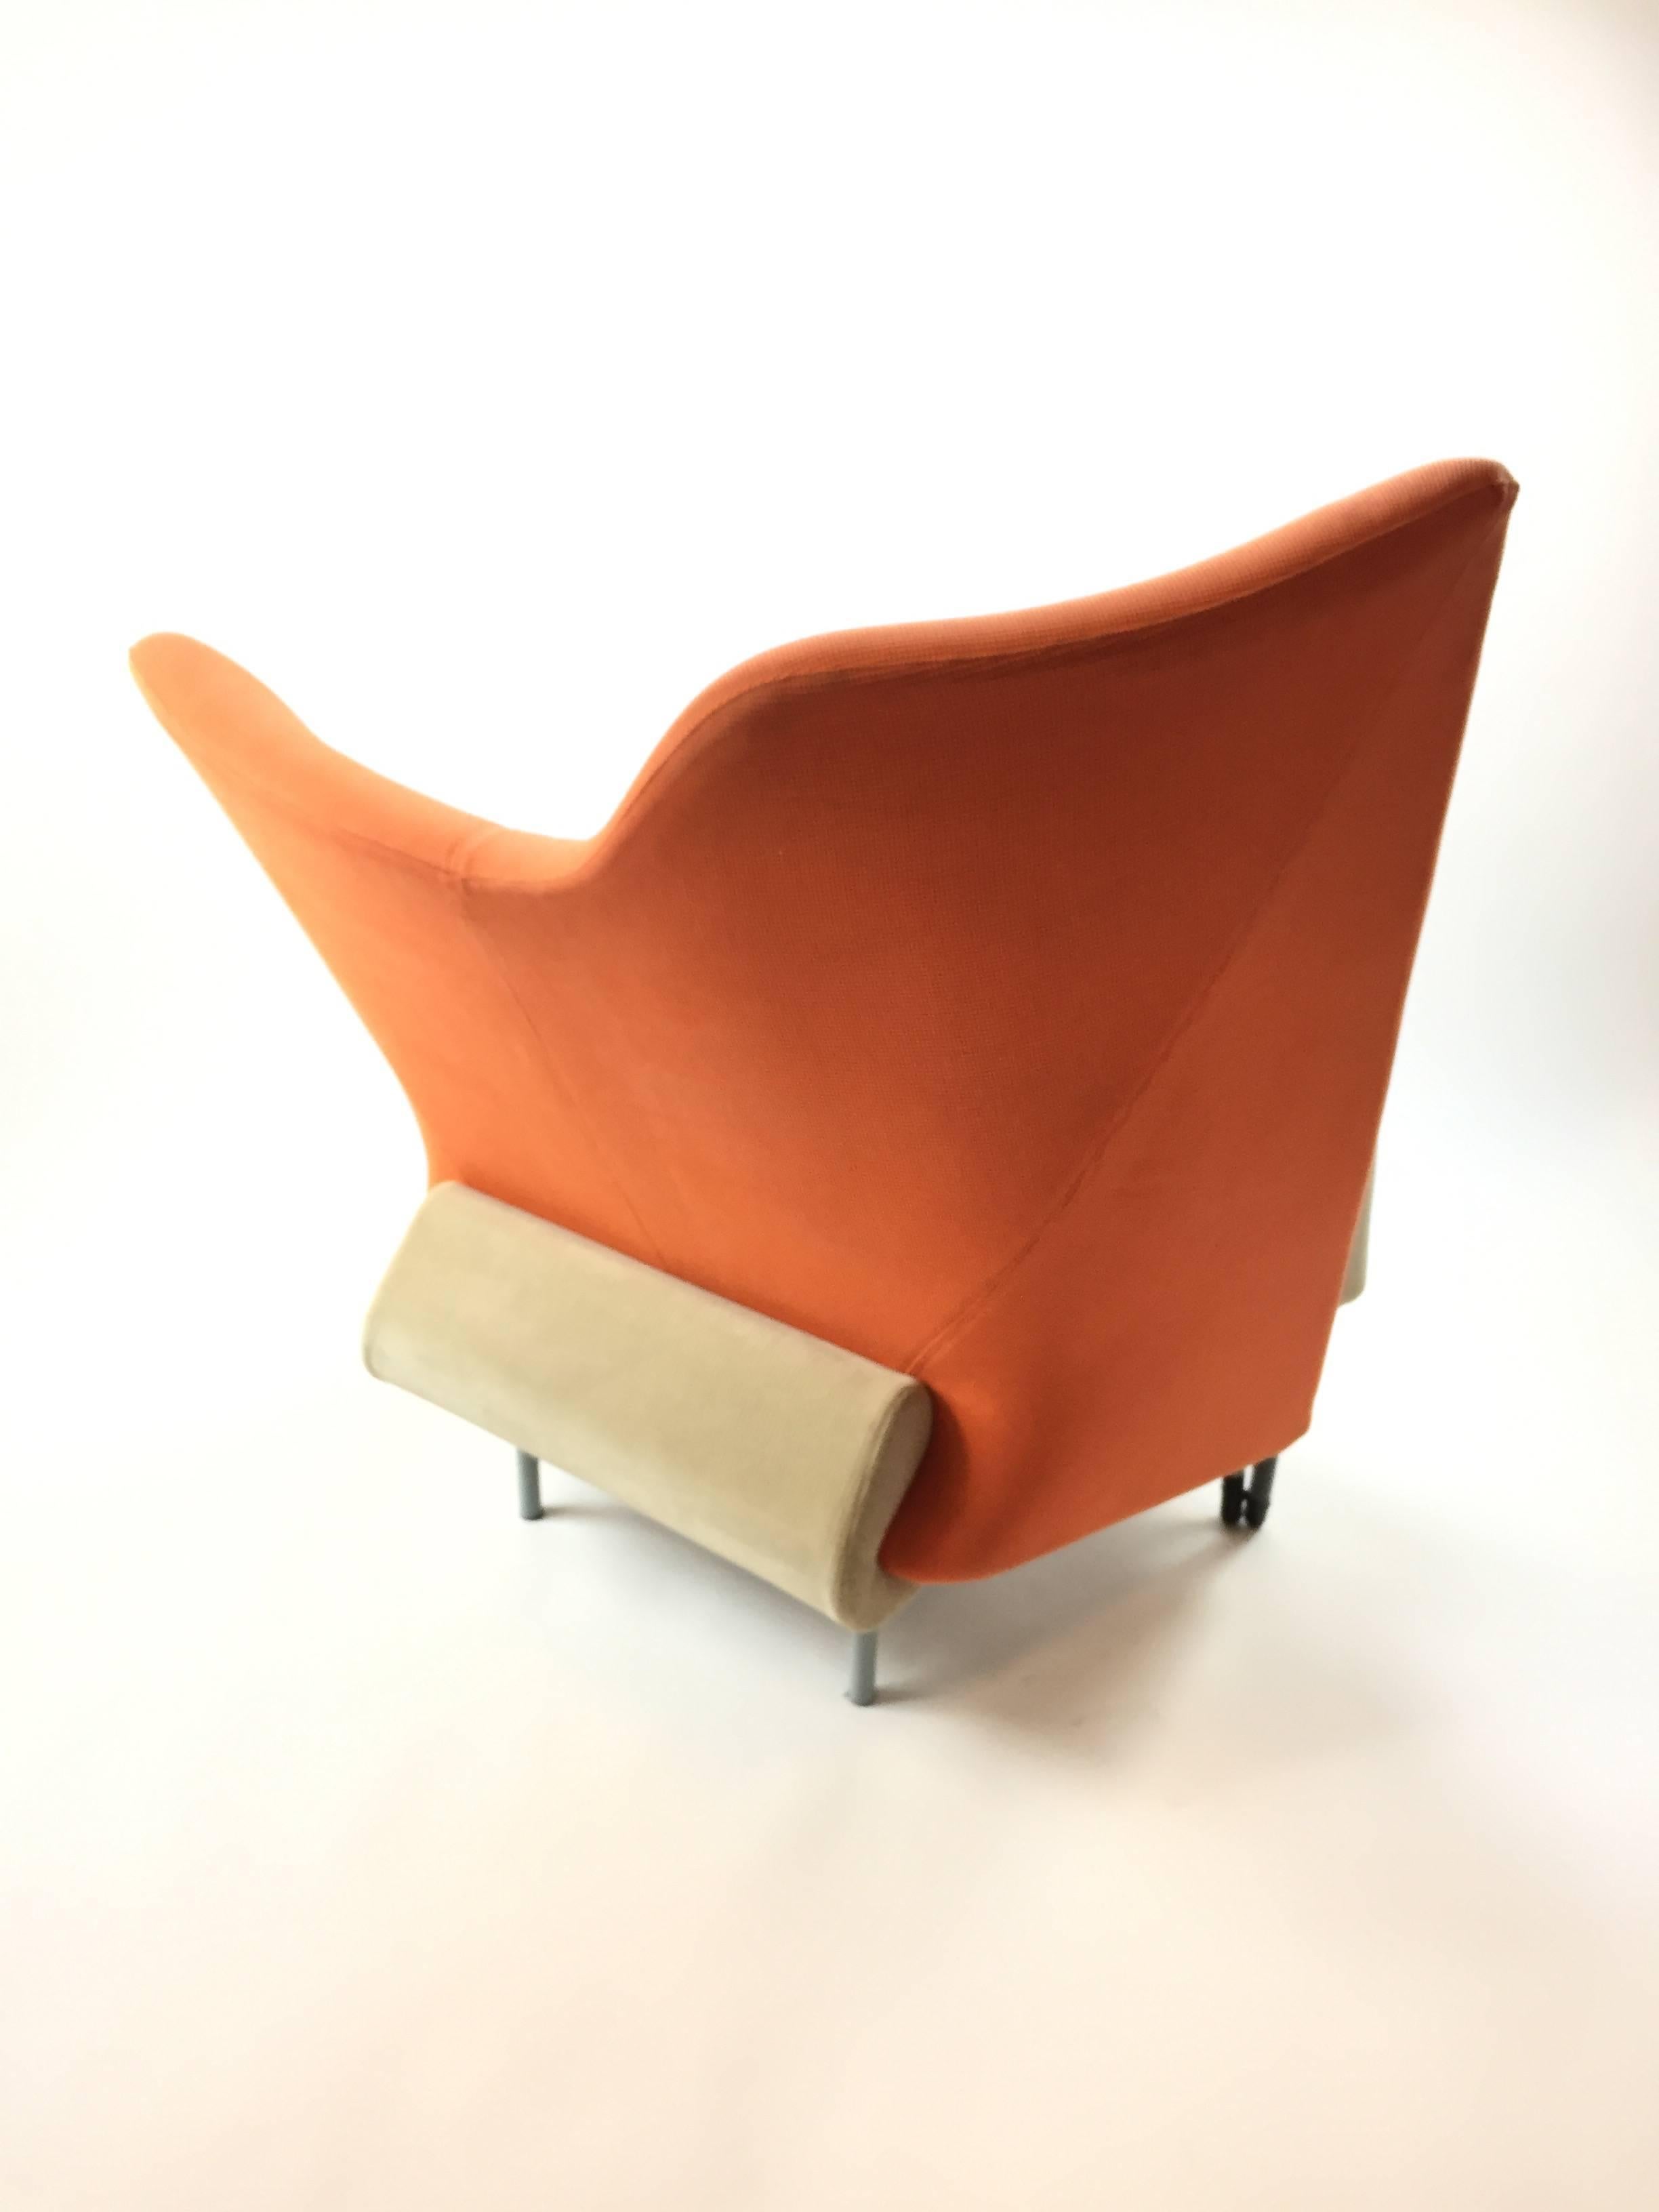 Pair of wild Memphis style torso chairs designed by Paolo Deganello, circa 1982 and manufactured by Cassina. Almond pinstripe velour base fabric and heavy tweed orange and yellow upper. Good condition or reupholster on request. Price is as-is.